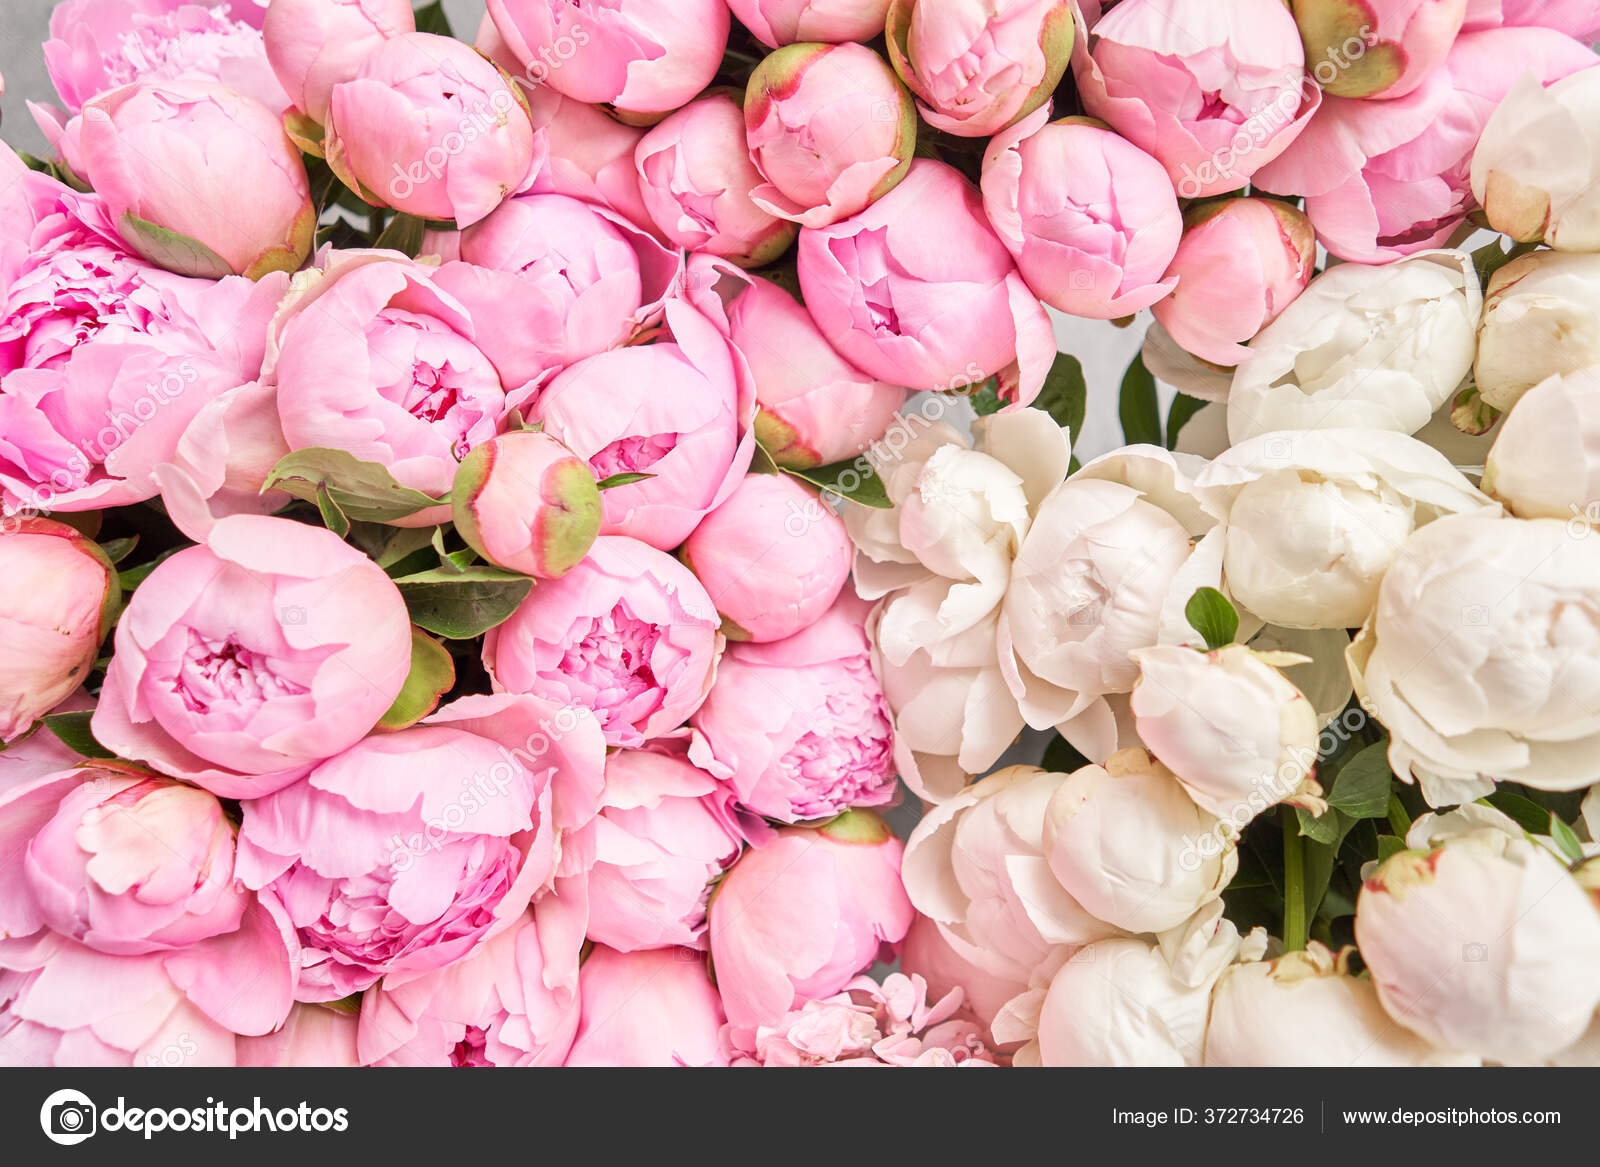 Floral carpet or Wallpaper. Background of pink and white peonies. Morning  light in the room. Beautiful peony flower for catalog or online store.  Floral shop and delivery concept . Stock Photo by ©